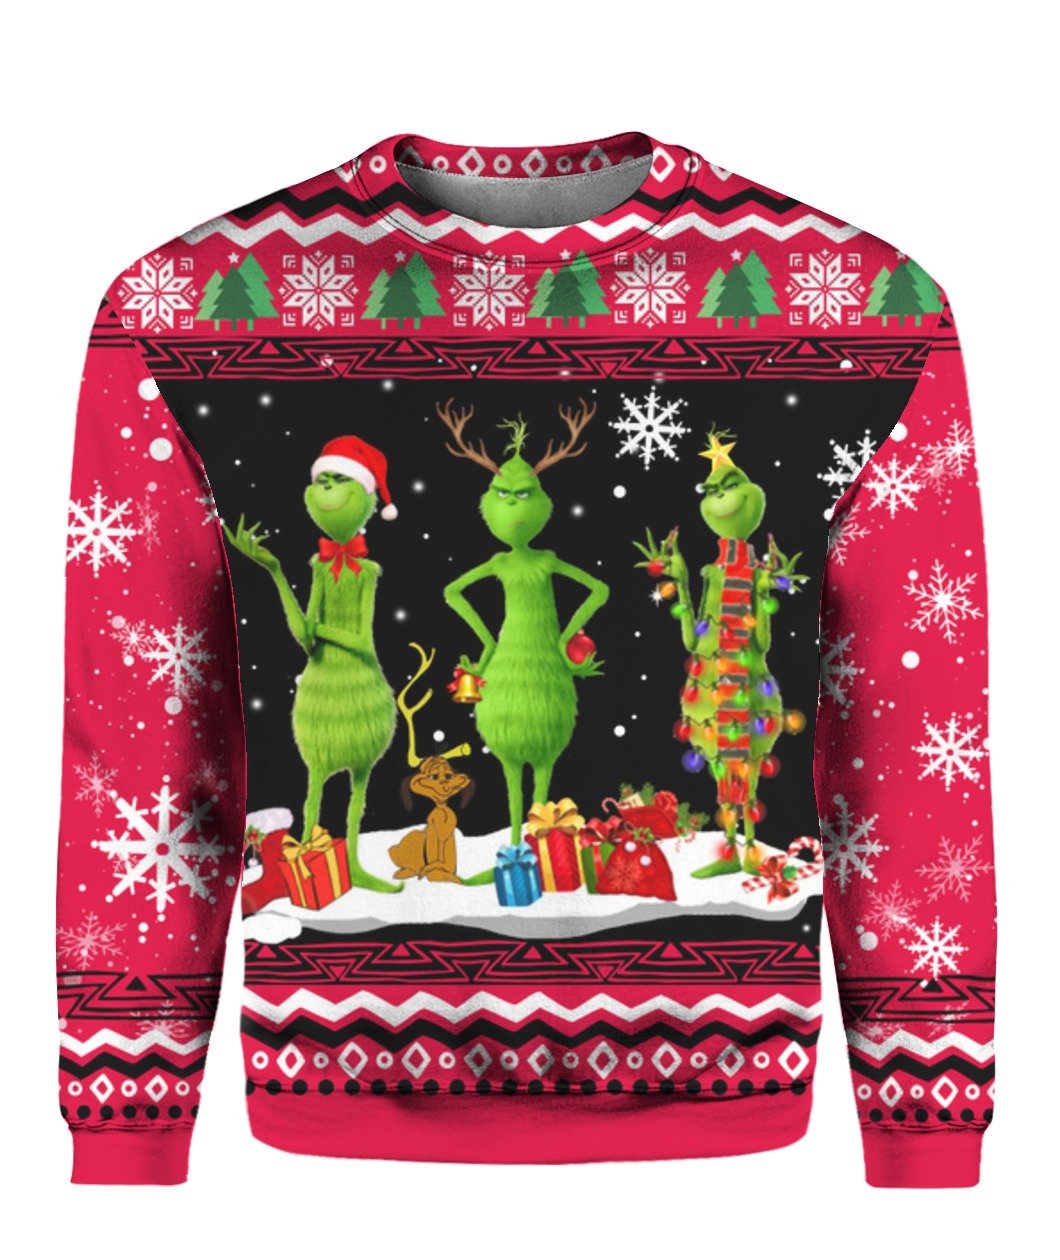 The grinch full printing ugly christmas sweater 1